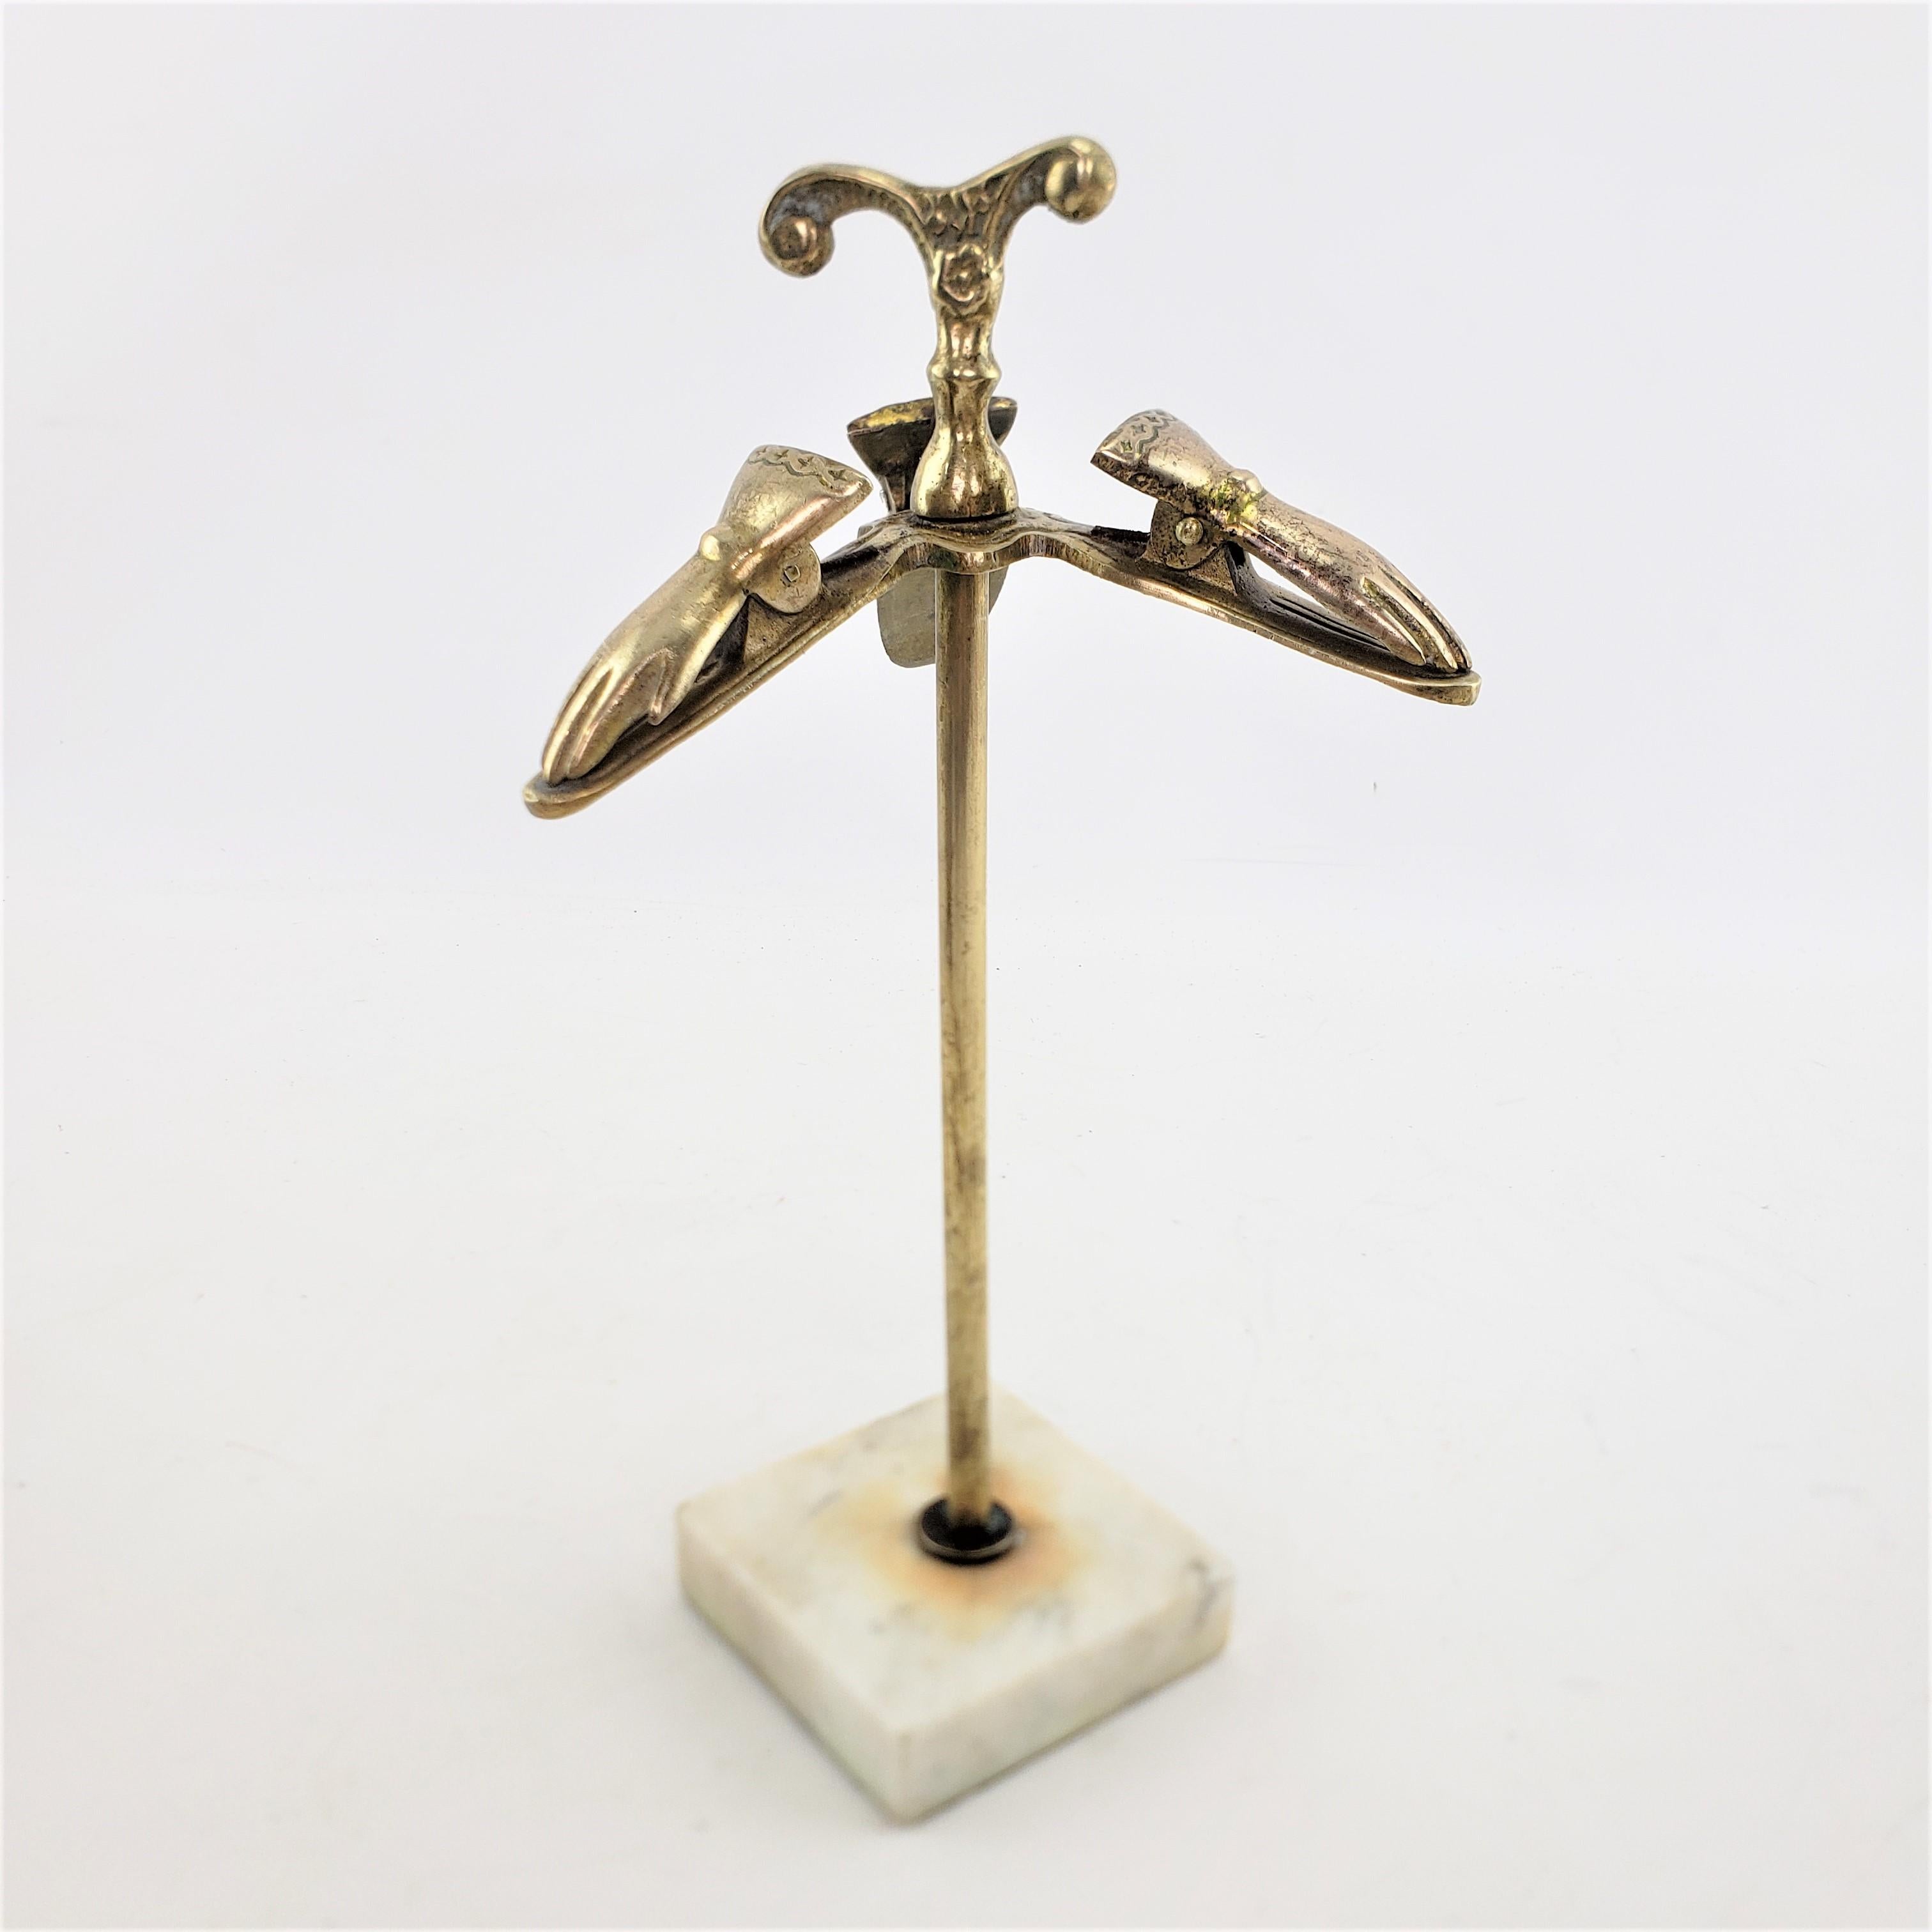 This antique brass and metal glove holder or stand is unsigned, but presumed to originate from England and date to approximately 1920 and done in a Victorian style. The stand is composed of brass and brass patinated metal and has a cast decorative